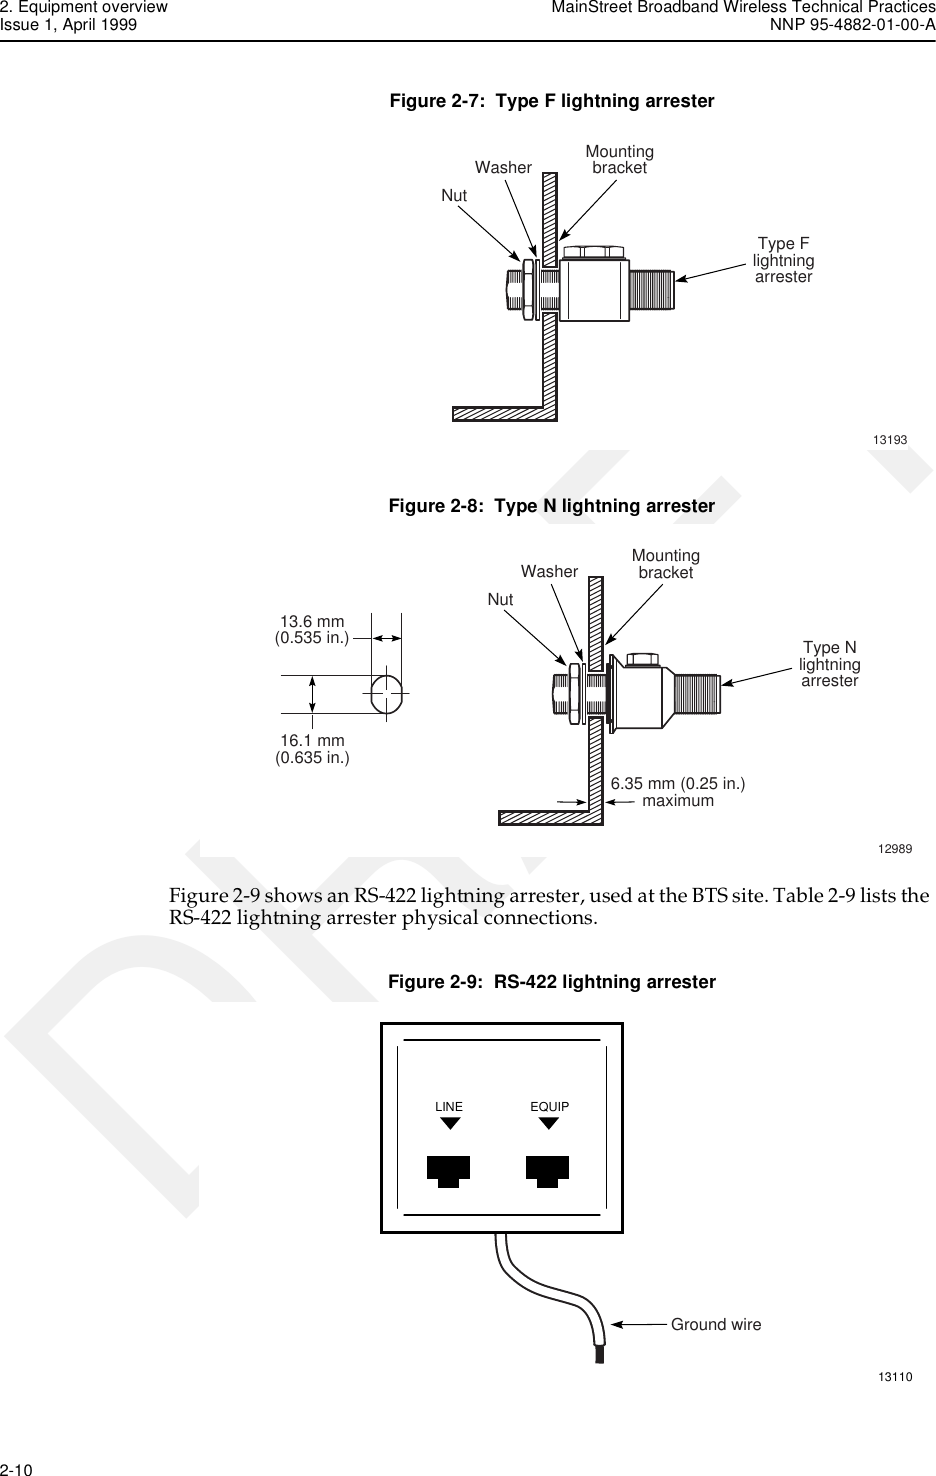 2. Equipment overview MainStreet Broadband Wireless Technical PracticesIssue 1, April 1999 NNP 95-4882-01-00-A2-10   DRAFTFigure 2-7:  Type F lightning arresterFigure 2-8:  Type N lightning arresterFigure 2-9 shows an RS-422 lightning arrester, used at the BTS site. Table 2-9 lists the RS-422 lightning arrester physical connections.Figure 2-9:  RS-422 lightning arresterMountingbracket13193Type FlightningarresterWasherNutType NlightningarresterMountingbracketWasherNut129896.35 mm (0.25 in.)maximum13.6 mm(0.535 in.)16.1 mm(0.635 in.)13110LINE EQUIPGround wire